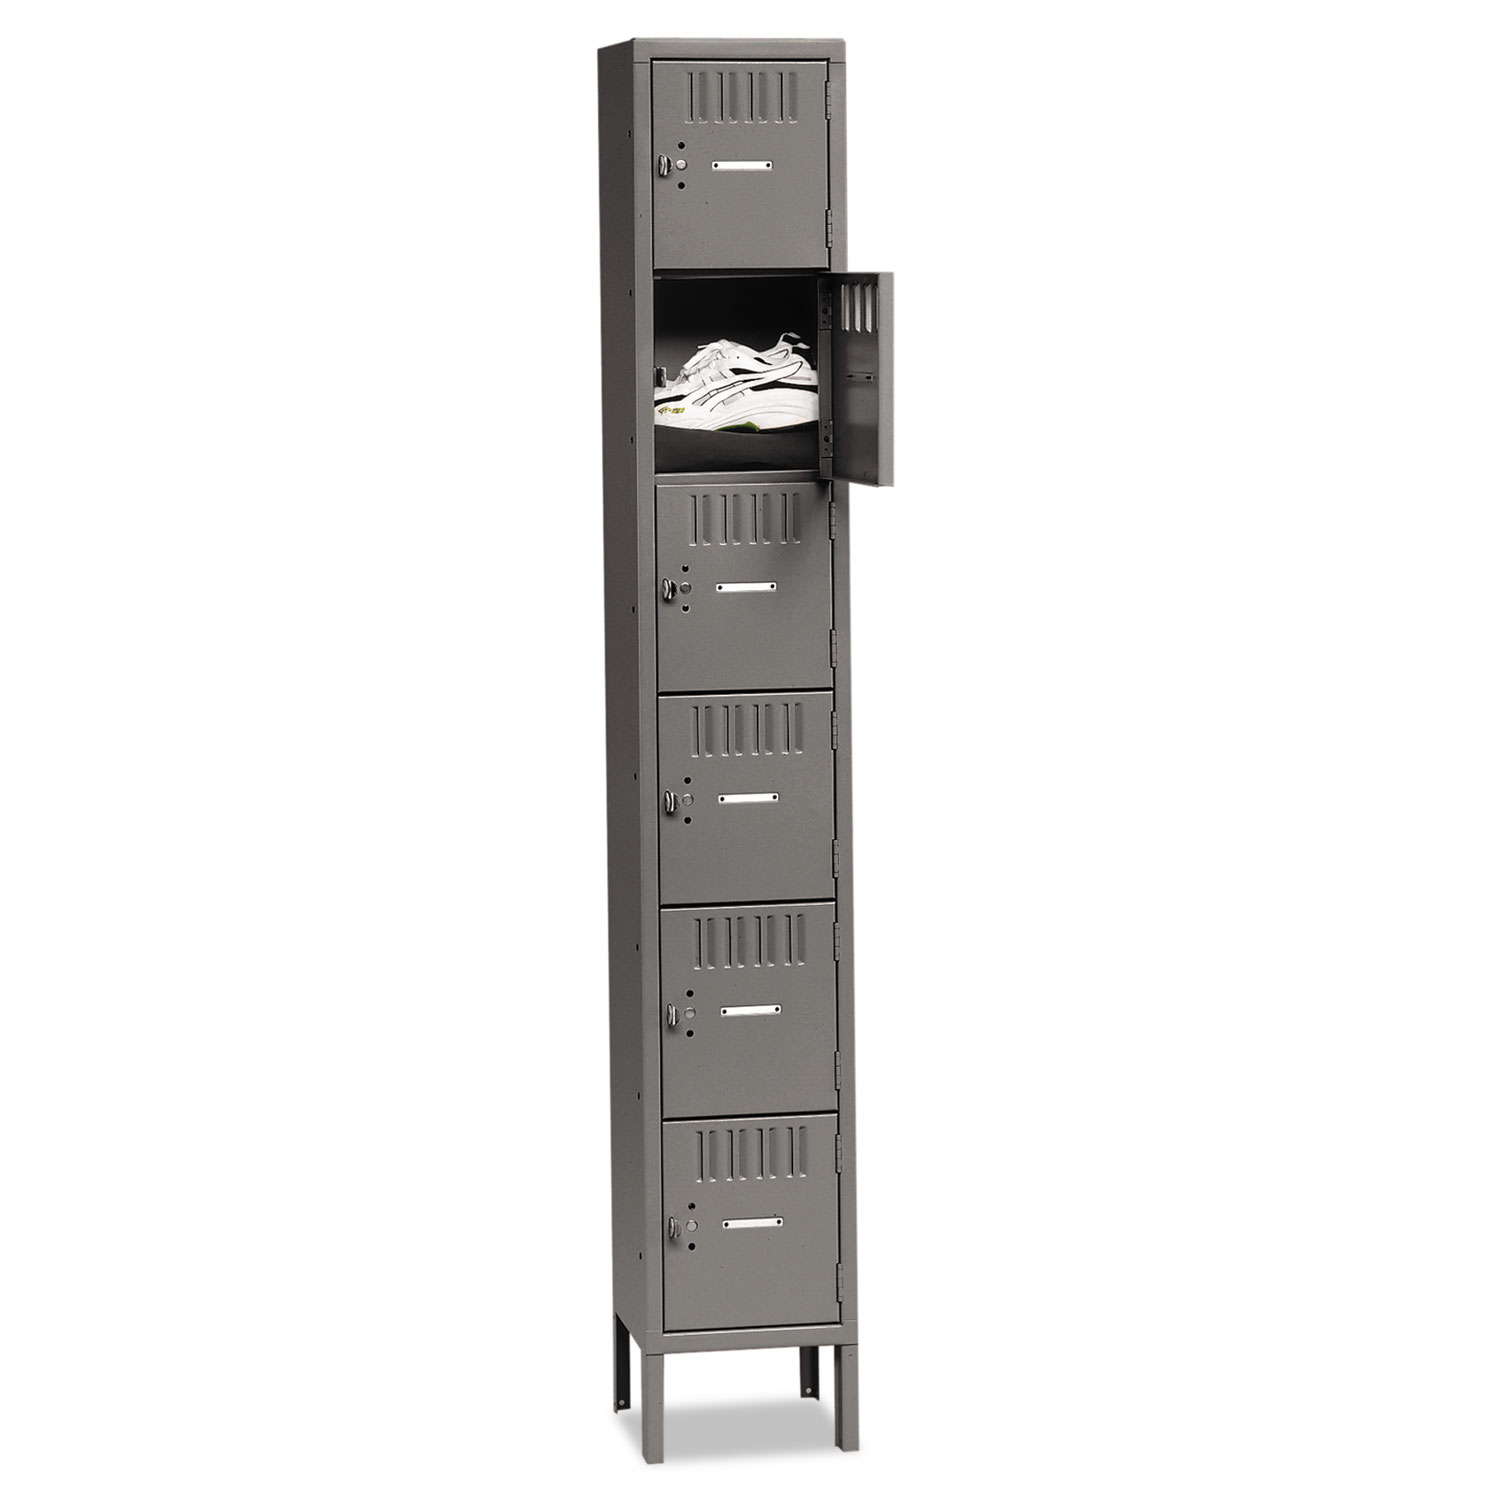 Box Compartments with Legs, Single Stack, 12w x 18d x 78h, Medium Gray